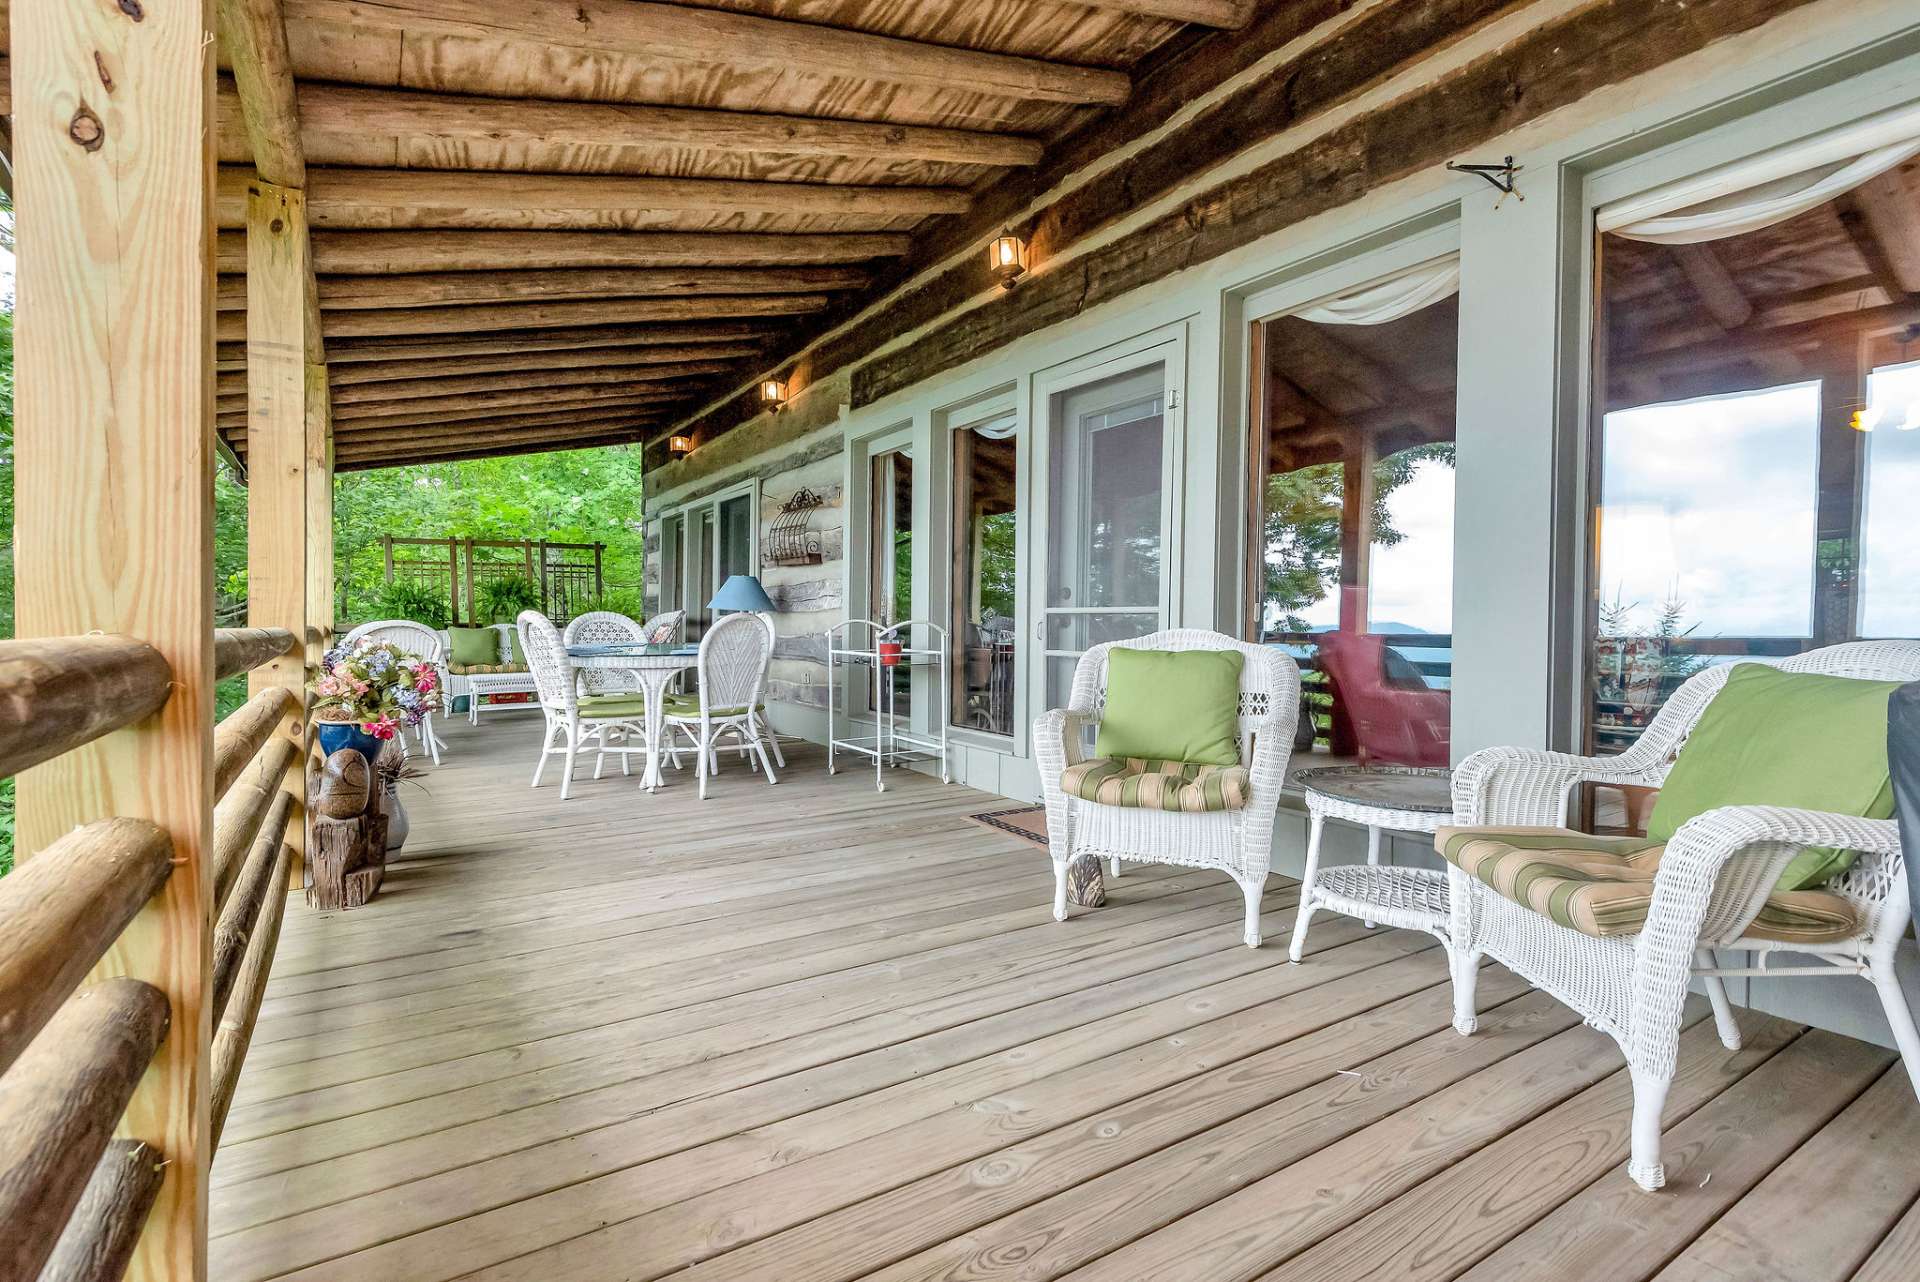 Perfect place to start the day with your morning coffee and end it with happy hour on the deck.